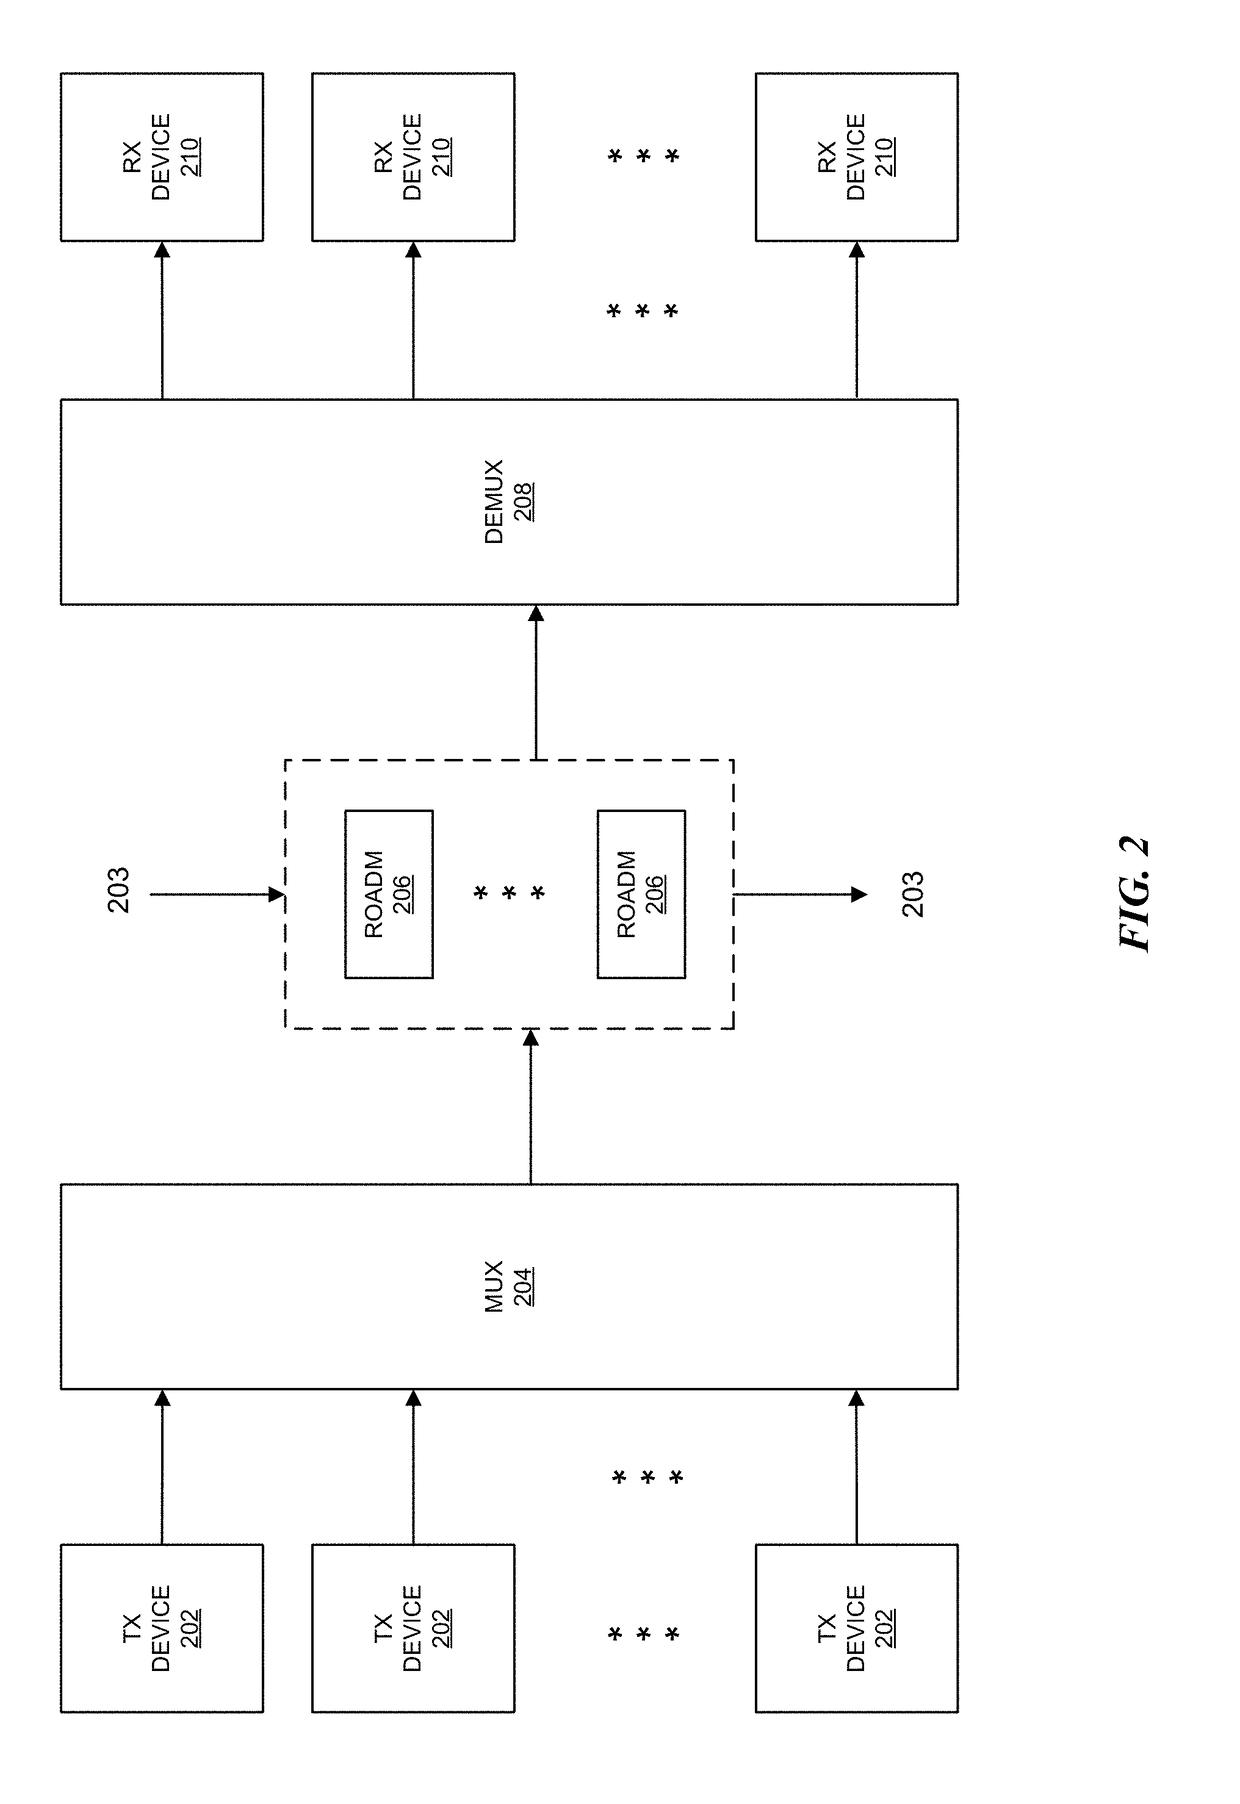 Method and apparatus for efficient network utilization using superchannels